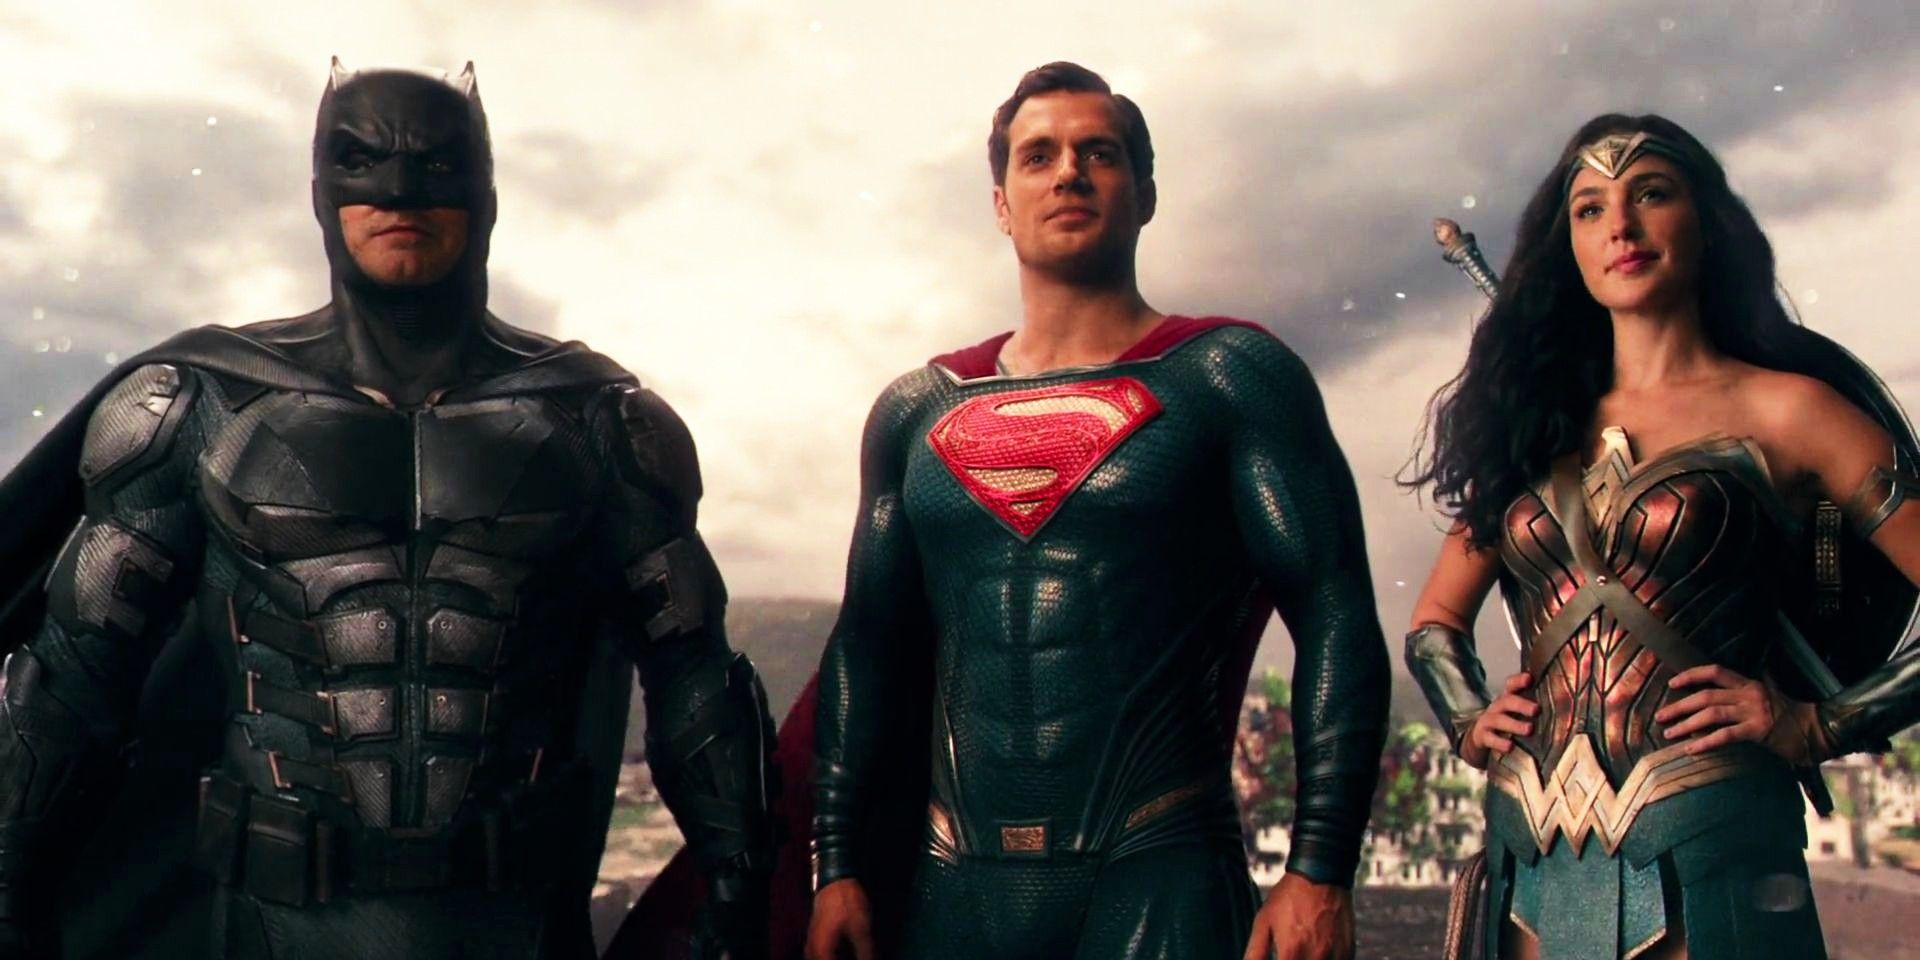 Batman, Superman and Wonder Woman in Joss Whedon's Justice League